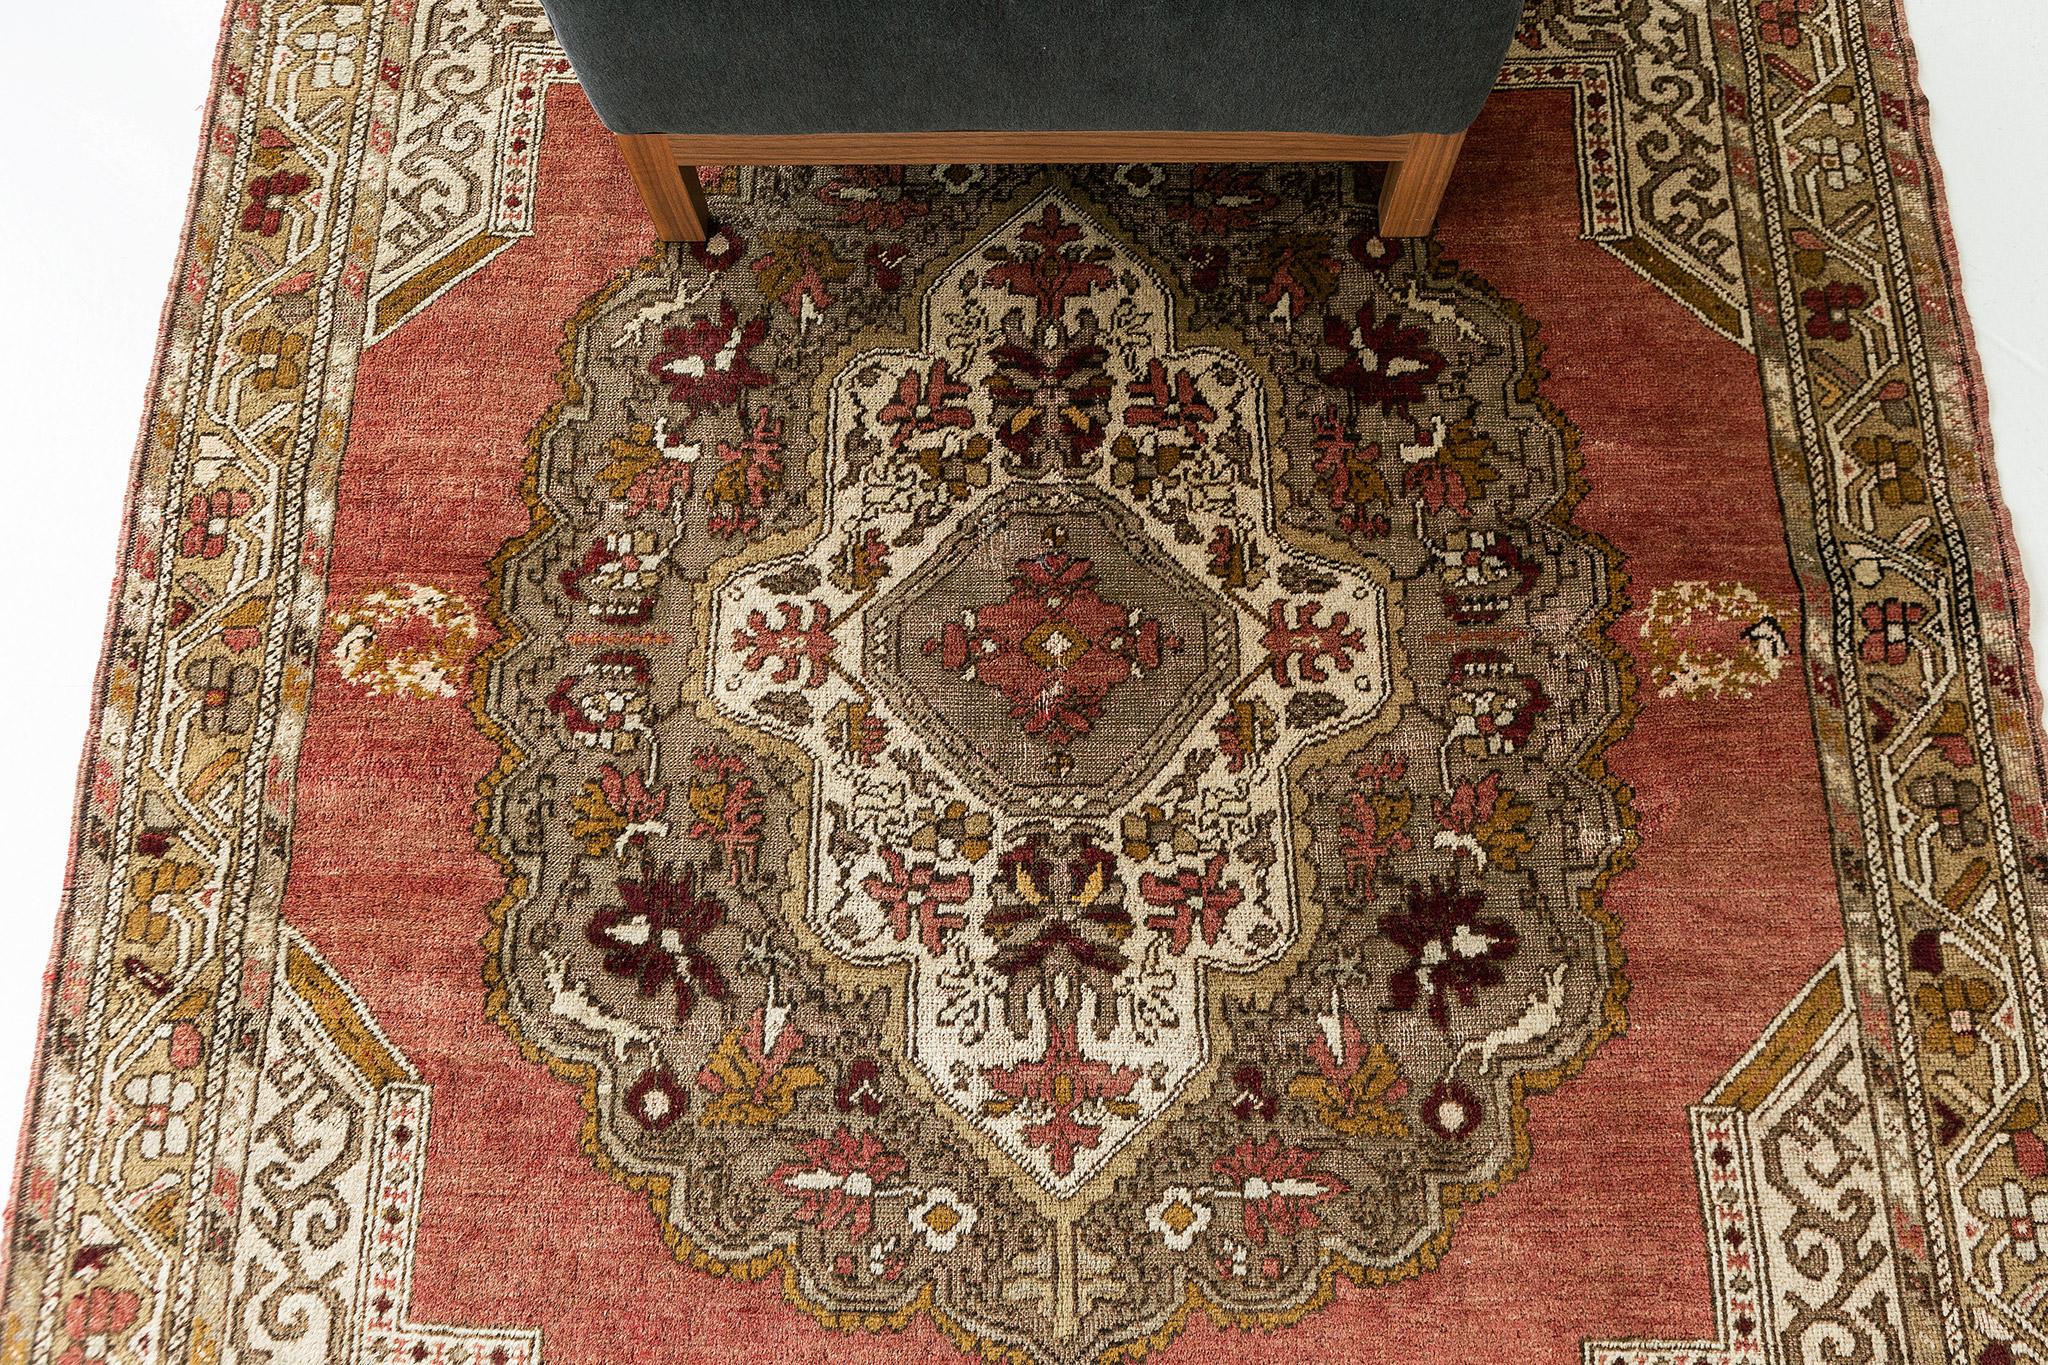 A Vintage Turkish Anatolian rug that is poised to impress. Characterized by predominantly Anatolian motifs with its ornate botanical details and warm colour scheme, this elaborate design creates a mesmerizing sense of well-balanced proportions.